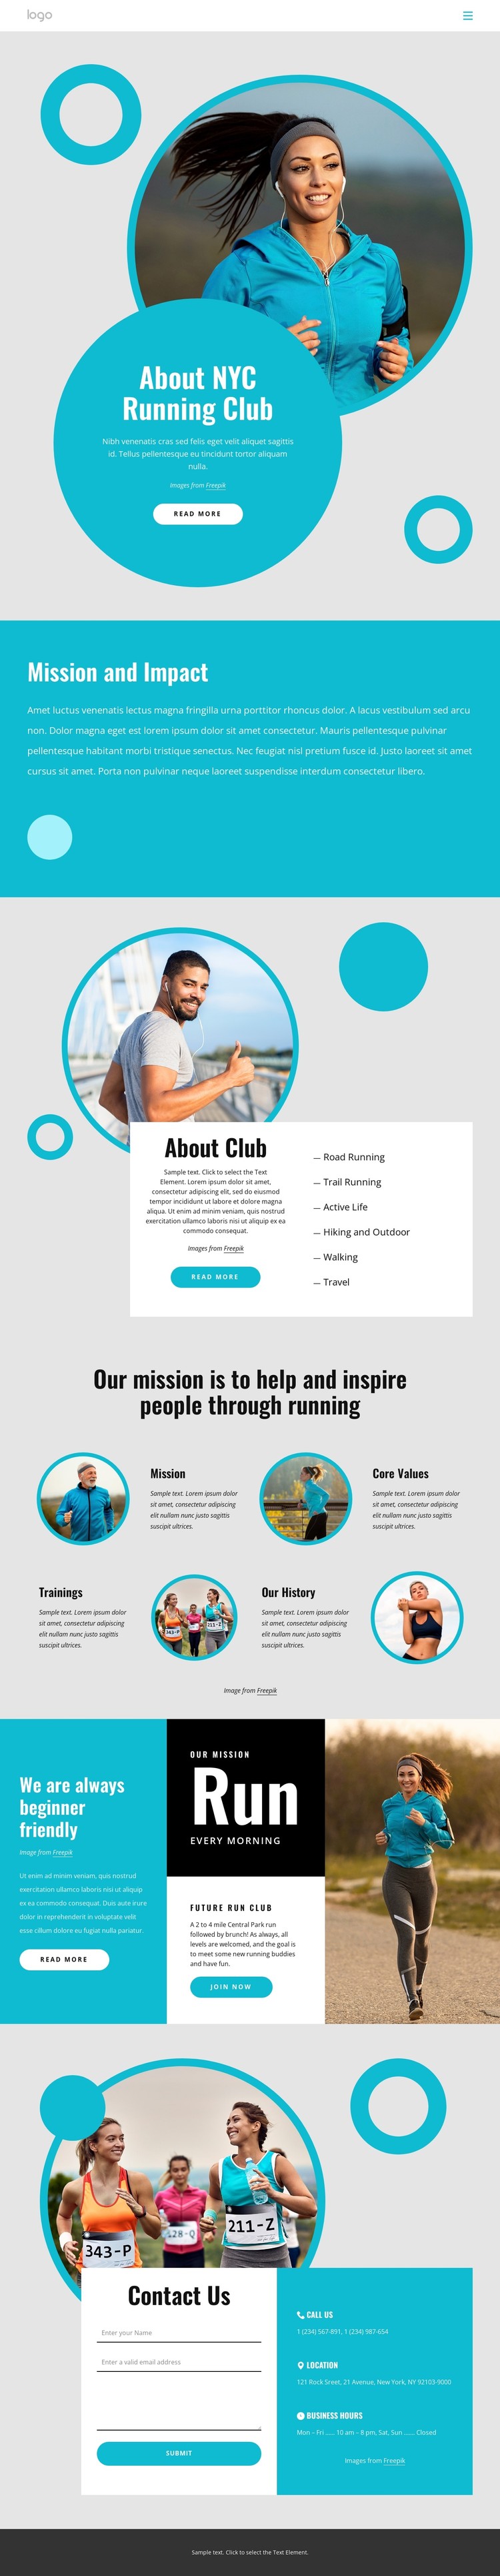 About NYC running club CSS Template